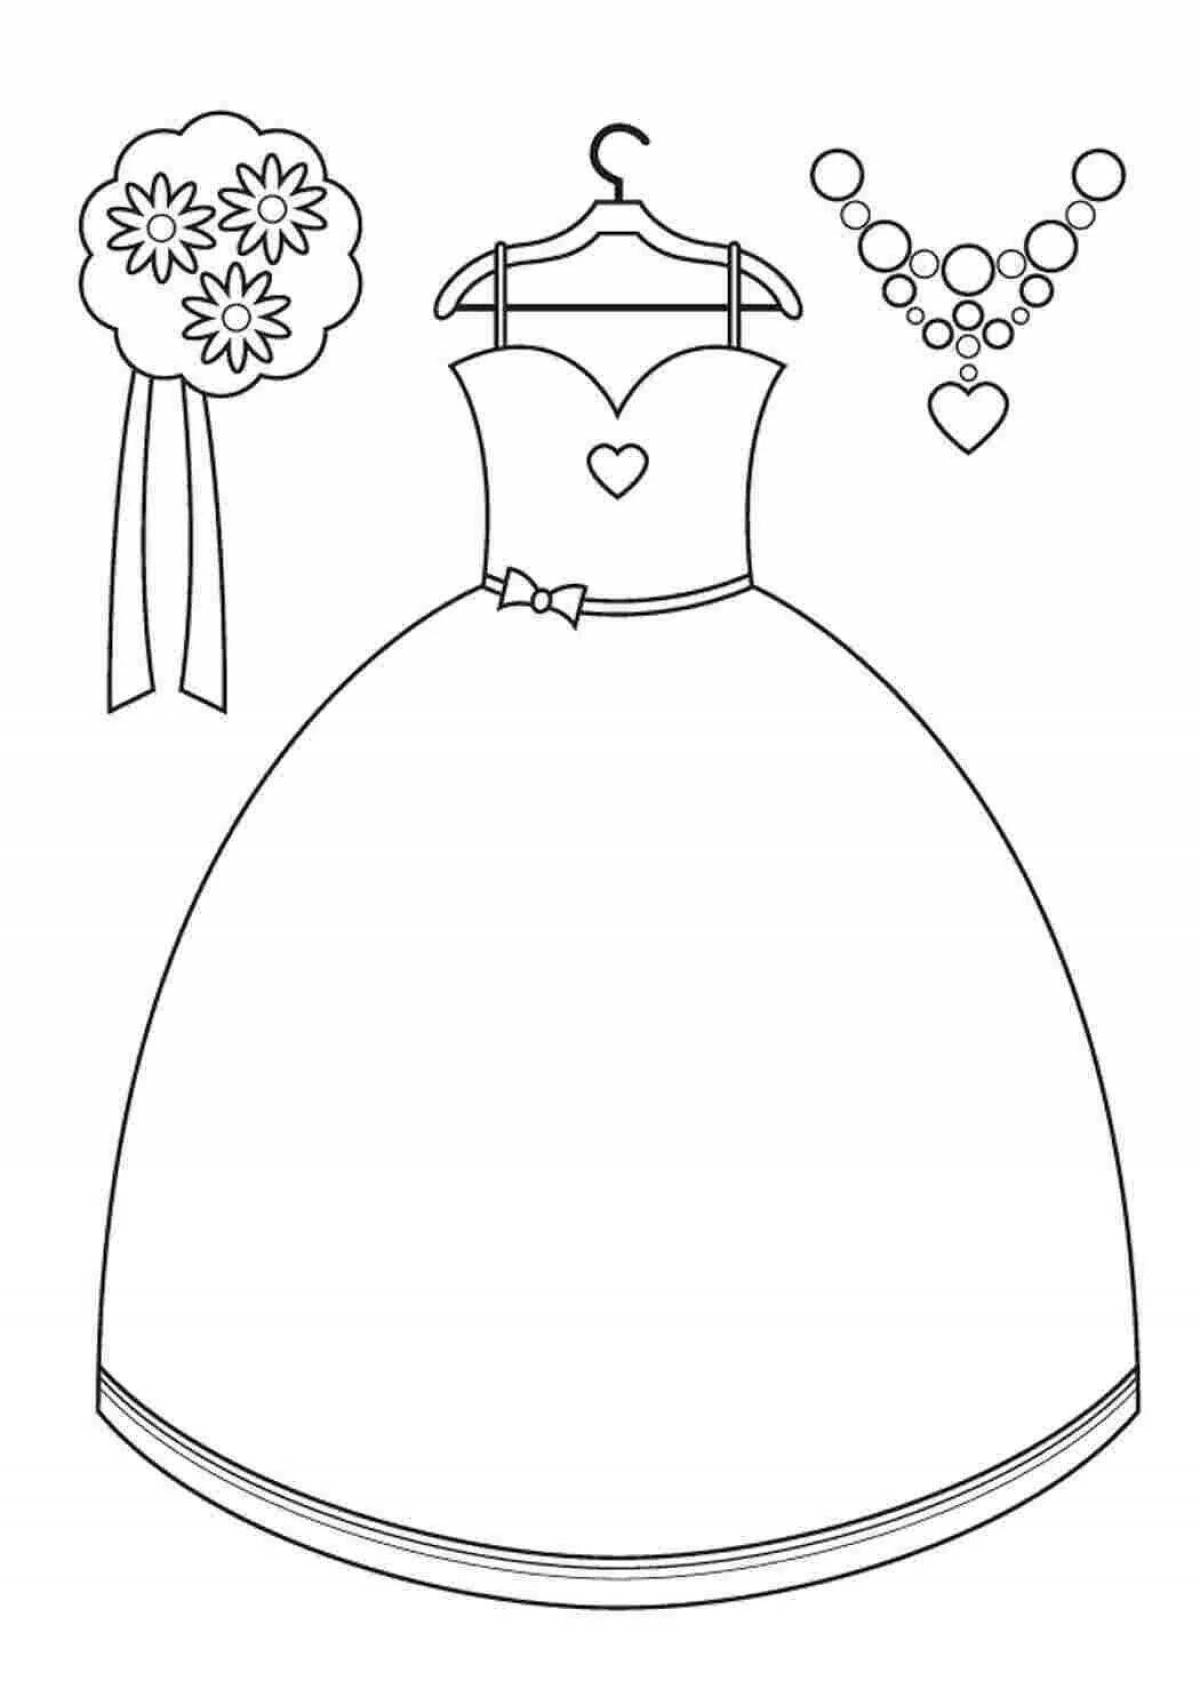 Amazing ball gown coloring book